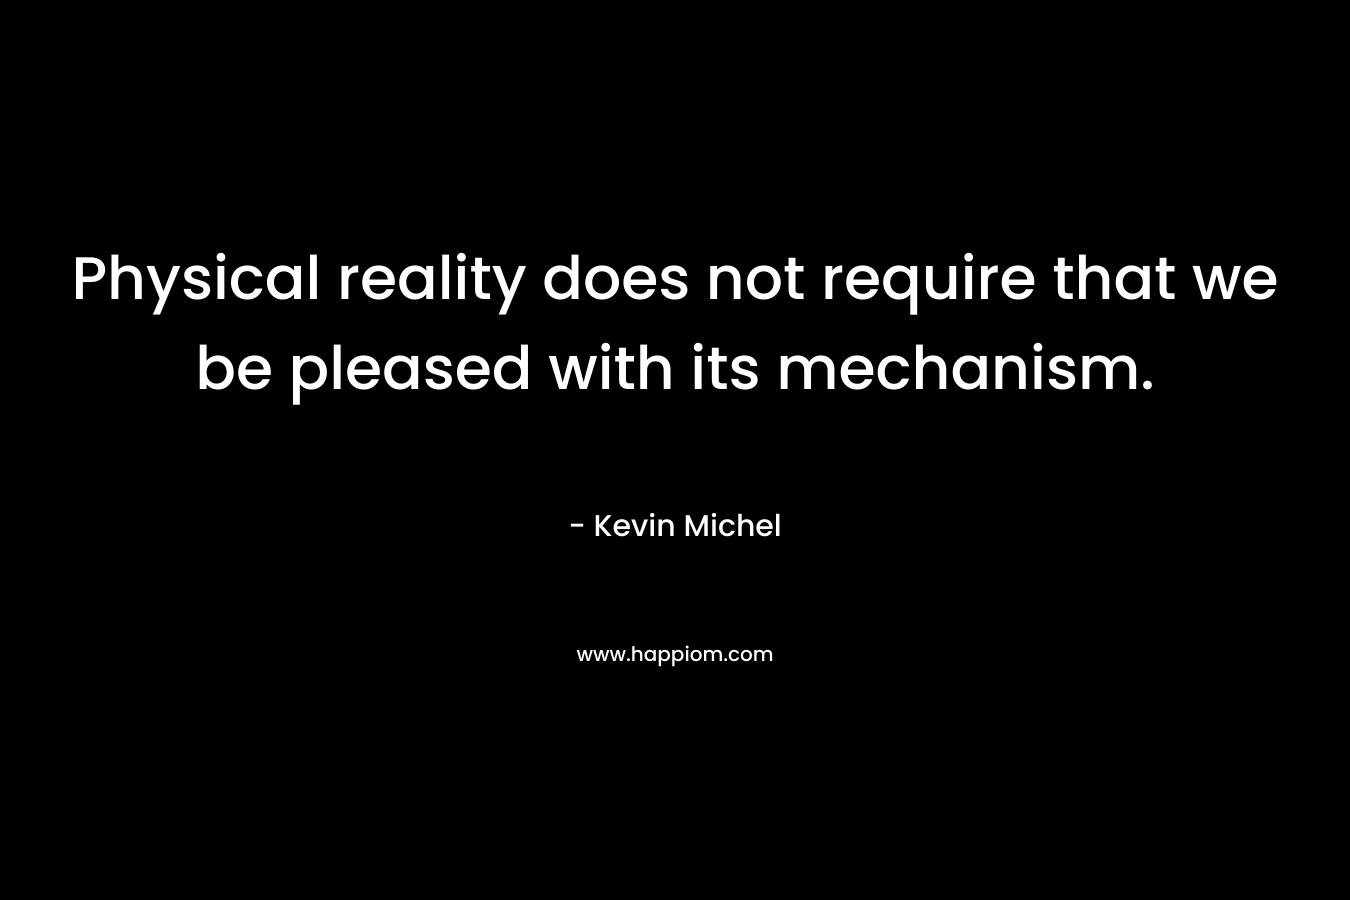 Physical reality does not require that we be pleased with its mechanism.